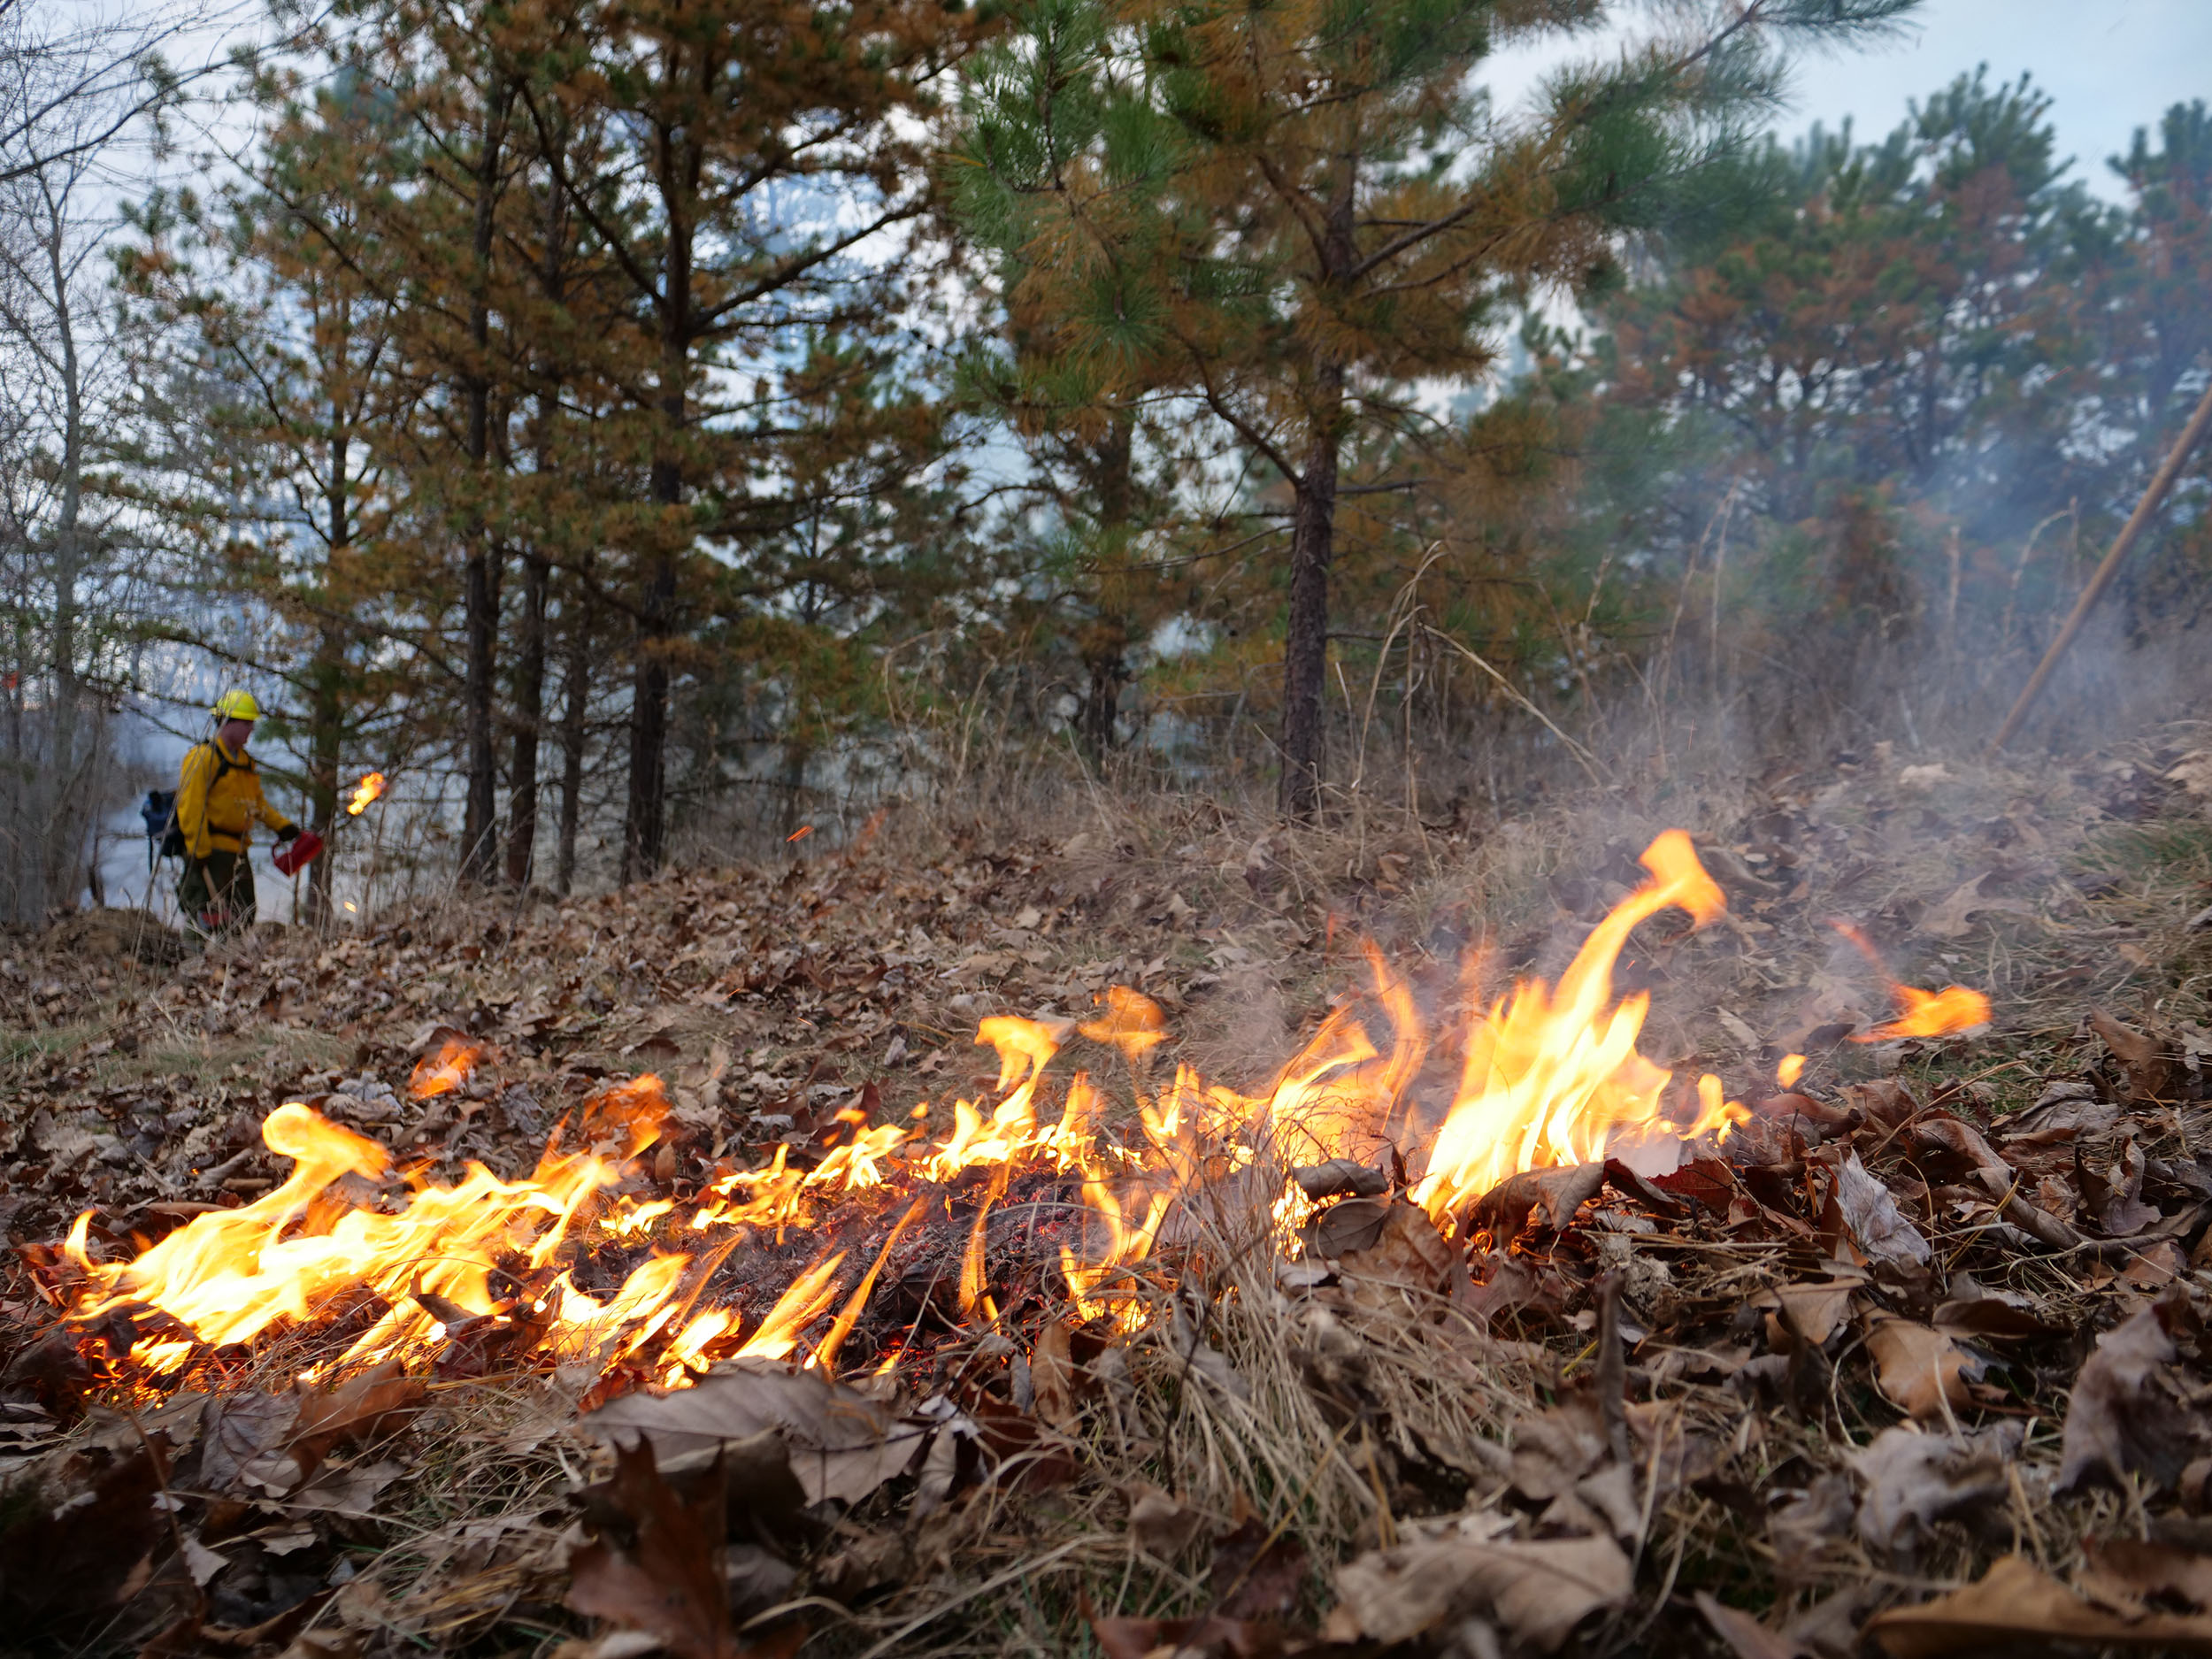 A predominant fuel source in deciduous forests is tree leaves and debris. These surface fuels are often reduced during prescribed burn operations, reducing potential wildfire hazard